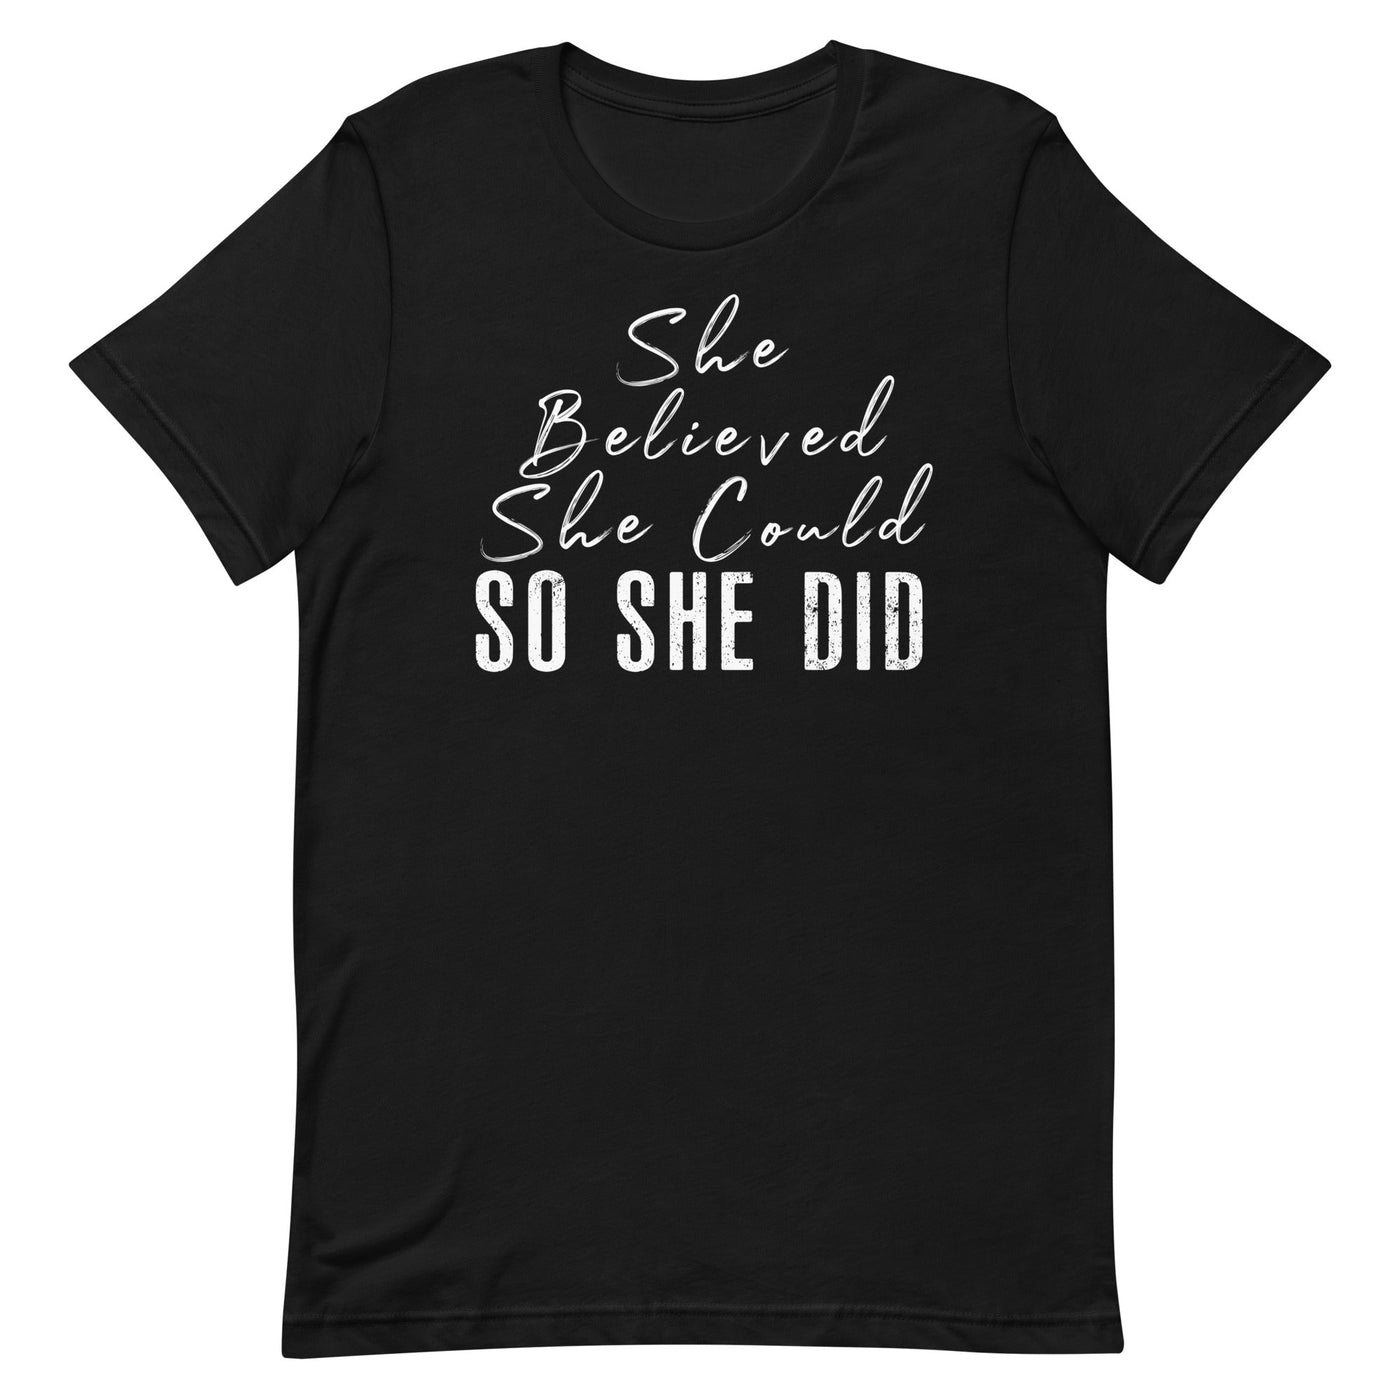 SHE BELIEVED SHE COULD SO SHE DID - WHITE FONT Black S 